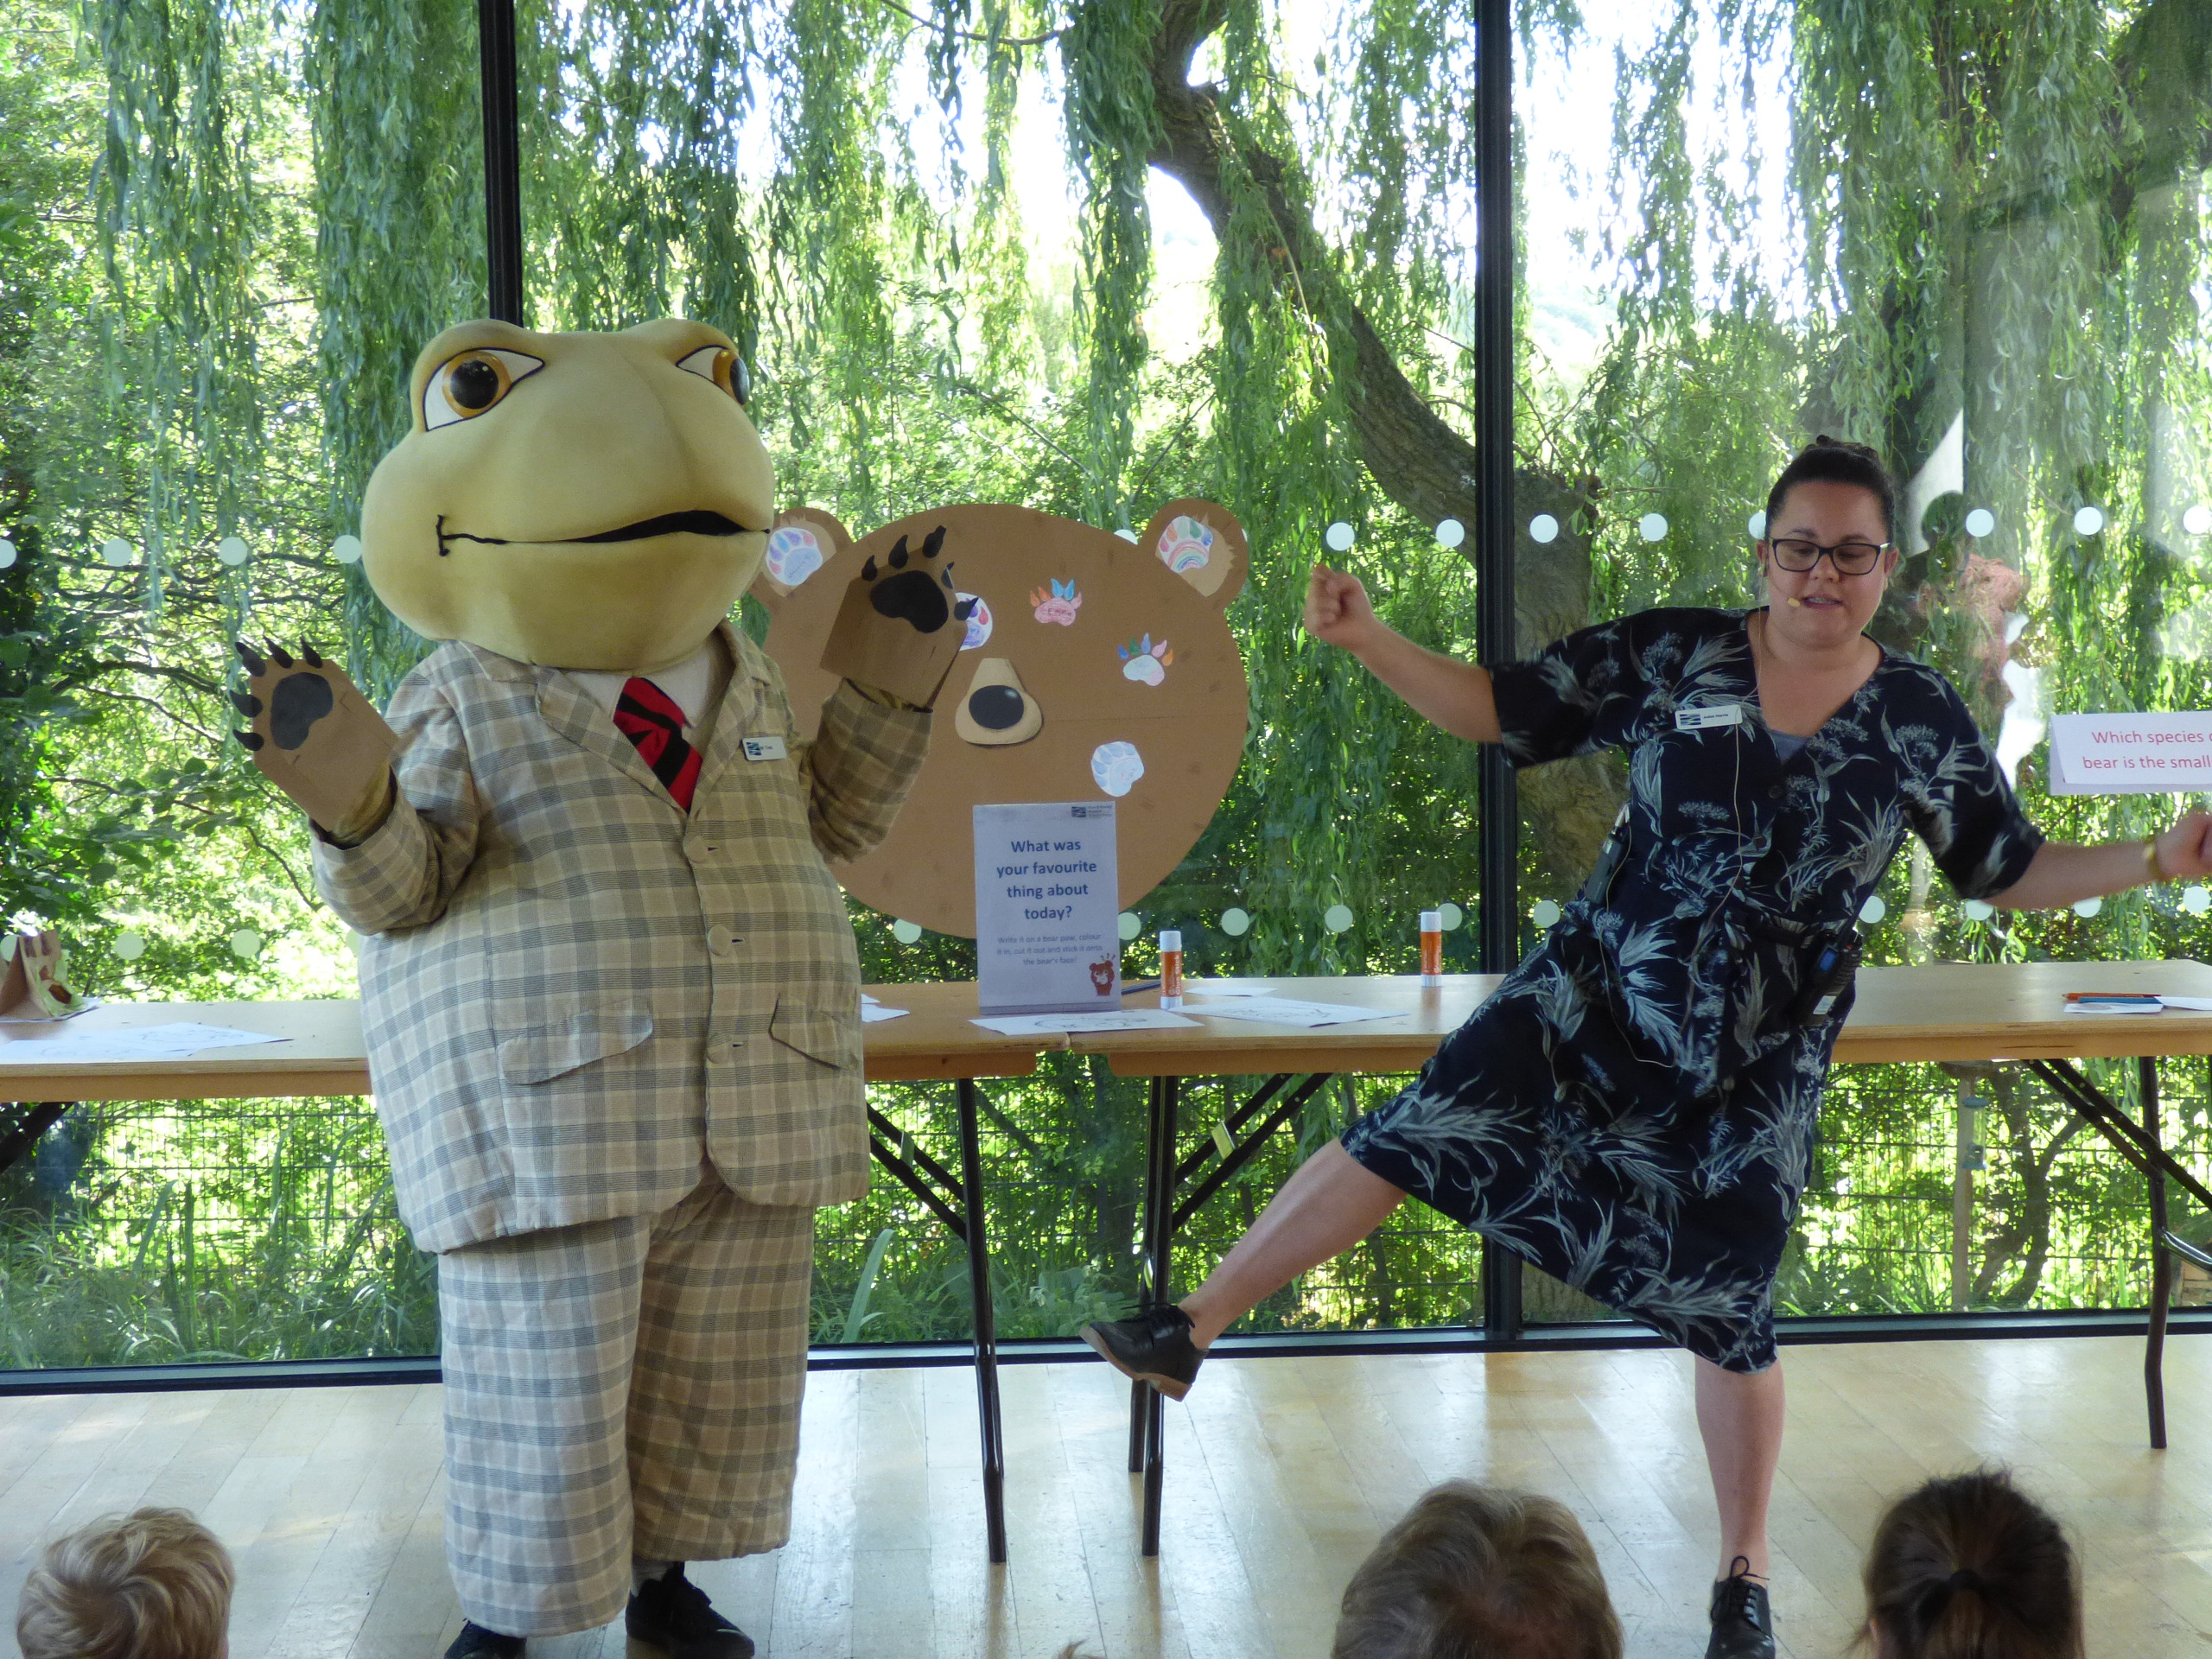 A woman is doing a dance with a Mr Toad character in front of an audience of children. The backdrop is leafy willow branches in the sunlight